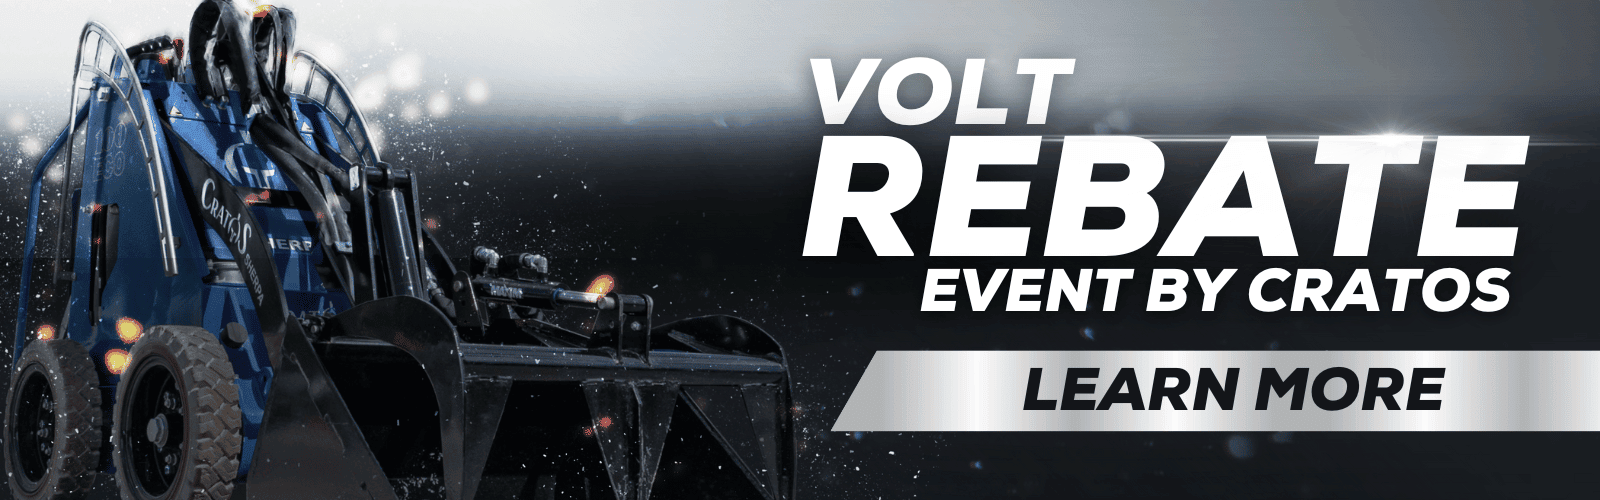 VOLT Rebate Event by Cratos Equipment. Learn More